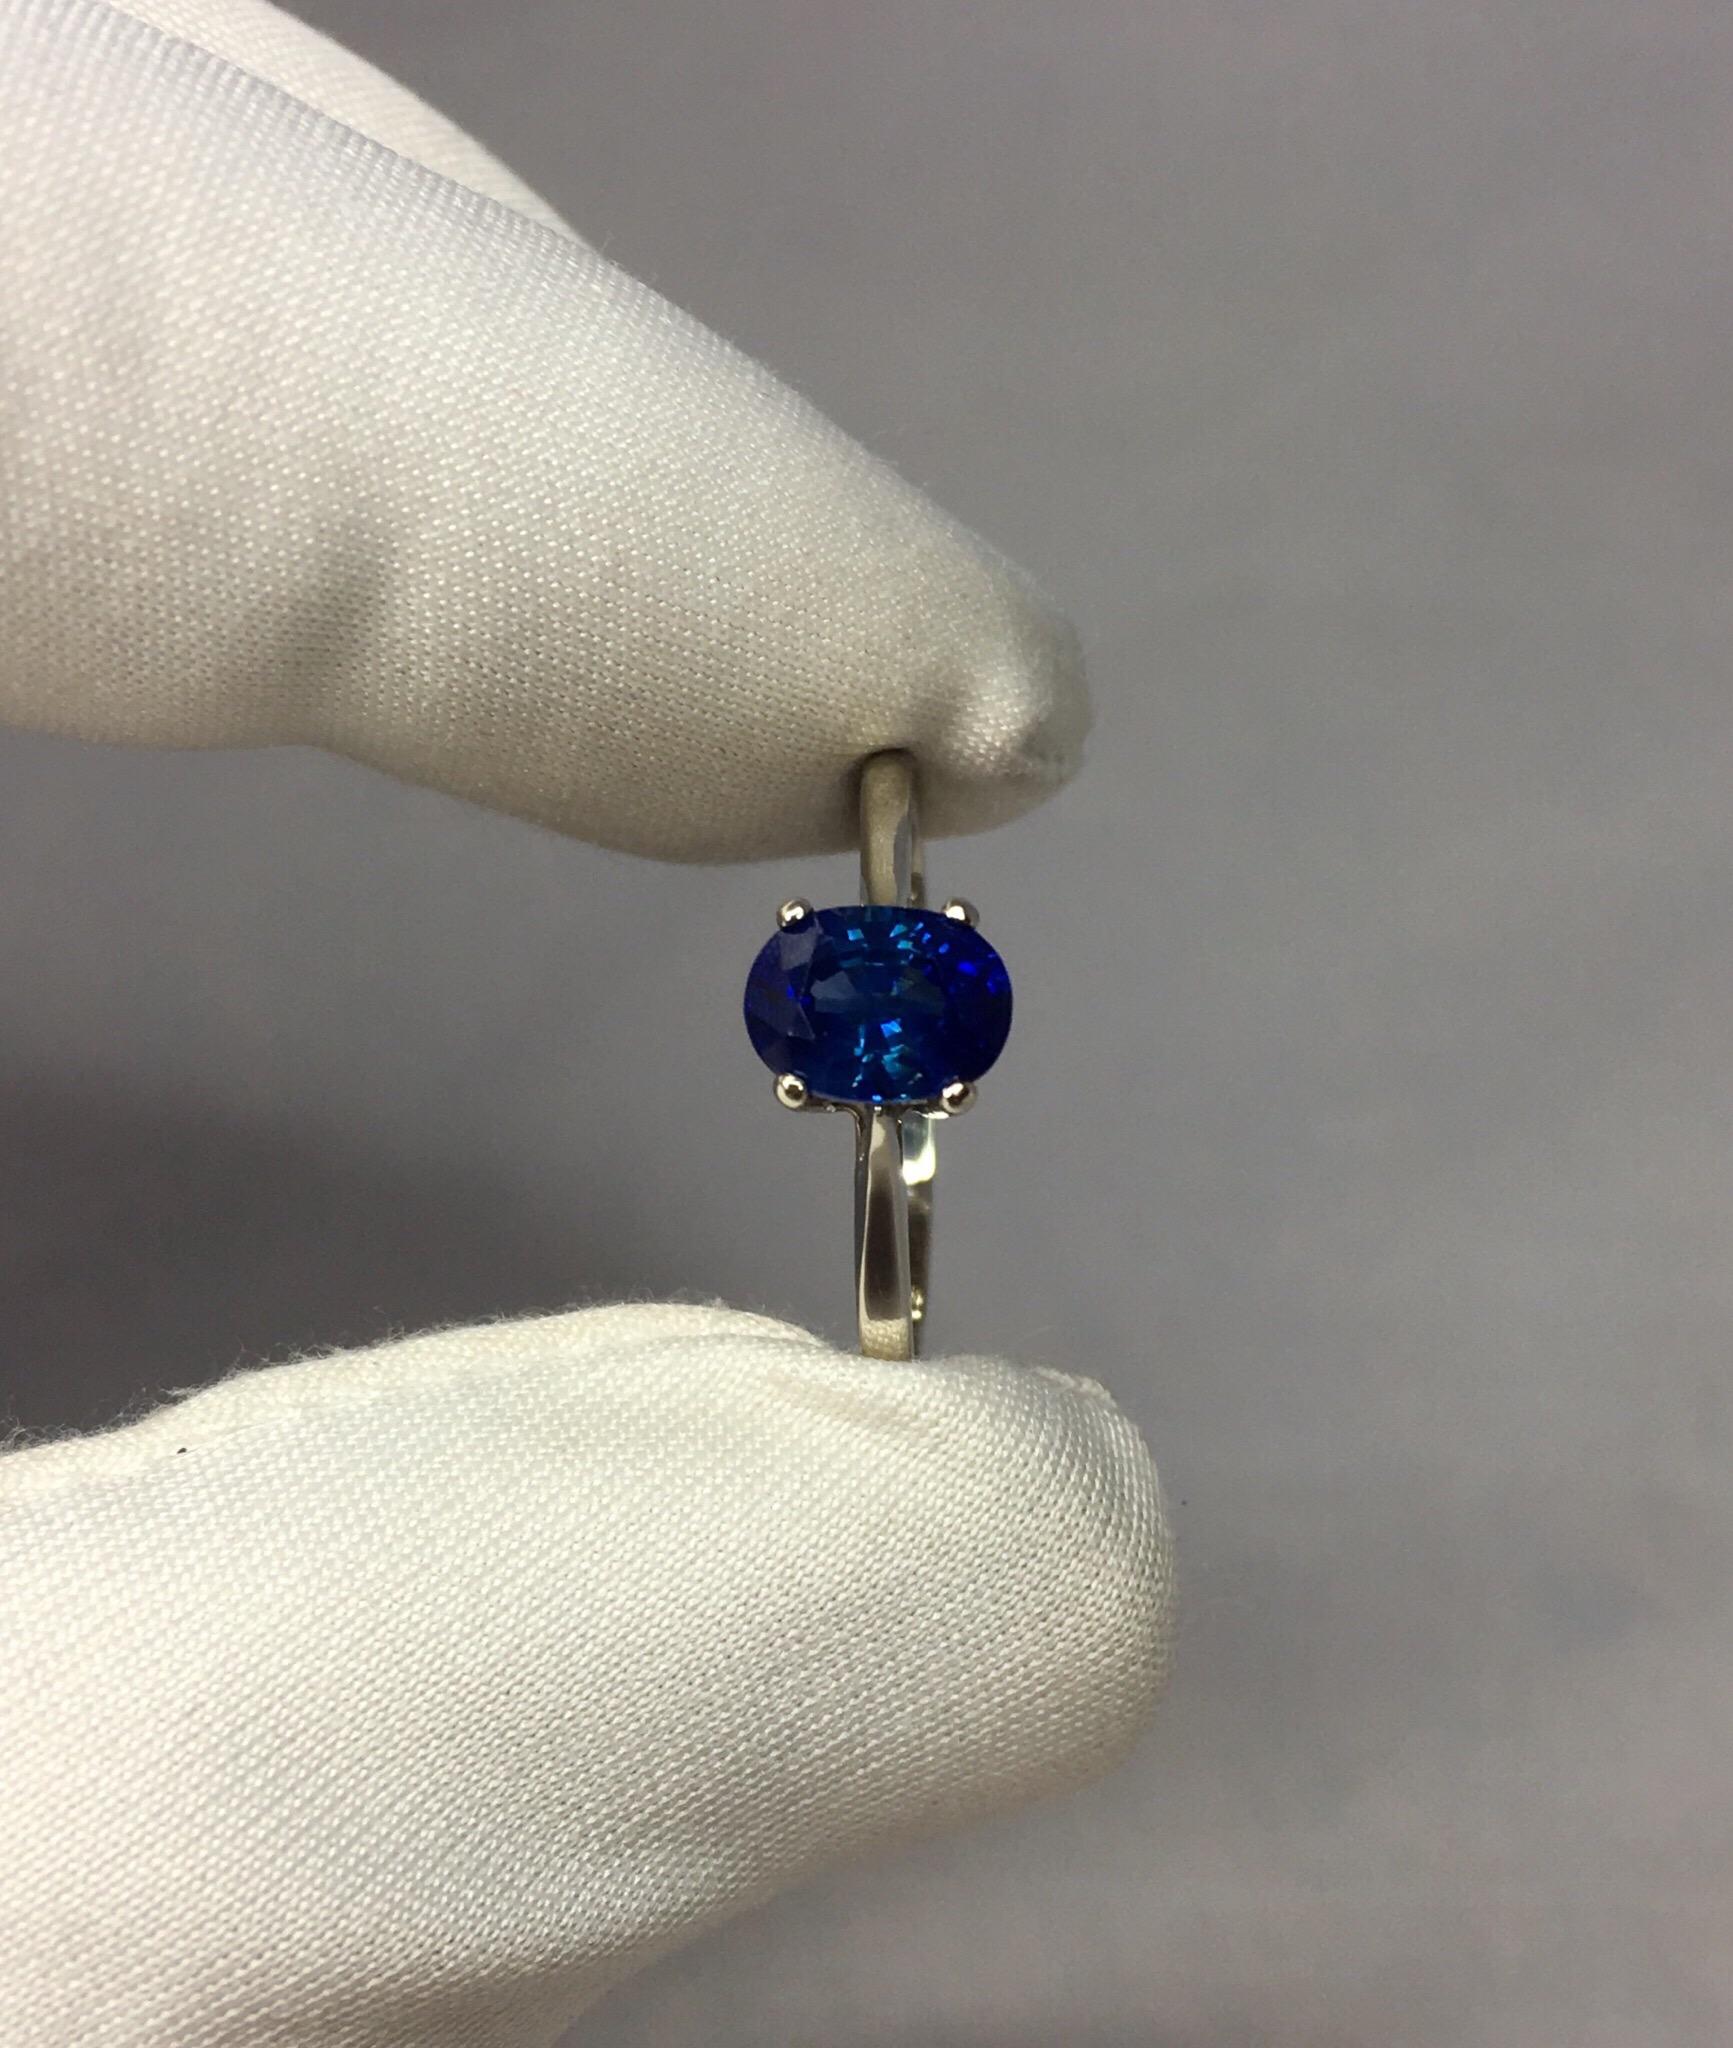 Stunning natural blue ceylon sapphire set in a beautiful 14k white gold solitaire ring. 

1.16 carat stone with a stunning and unique blue colour and excellent clarity, very clean stone.

Ring size M1/2. The ring is re-sizeable.

Standard heated